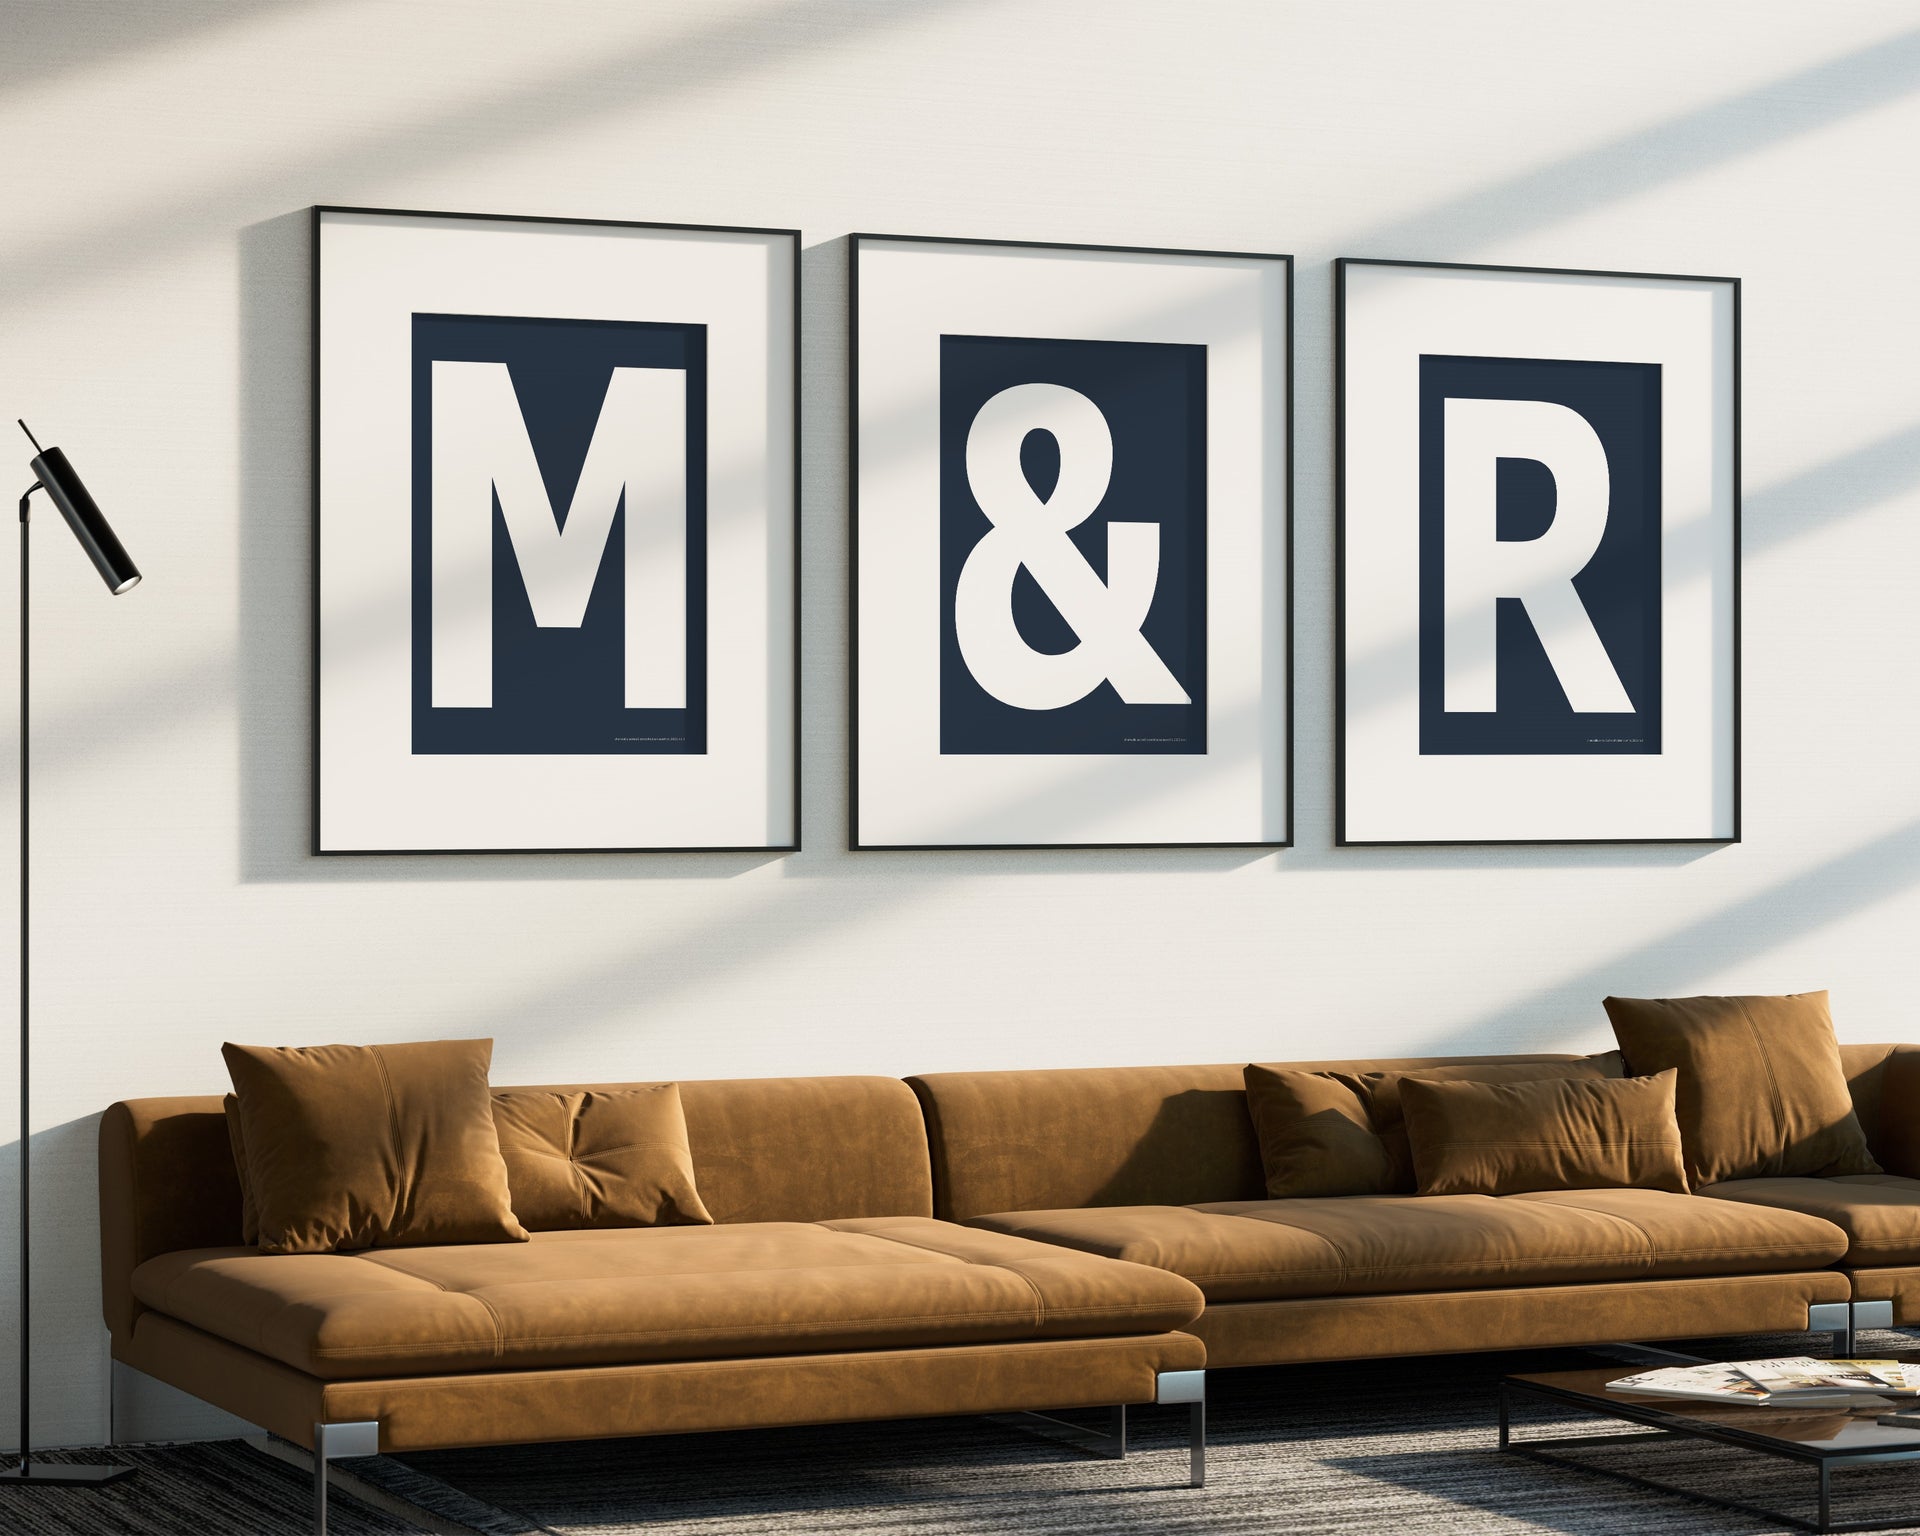 Three oversized framed navy blue and white letter and ampersand art prints spelling out M&R hanging above a modern sofa.